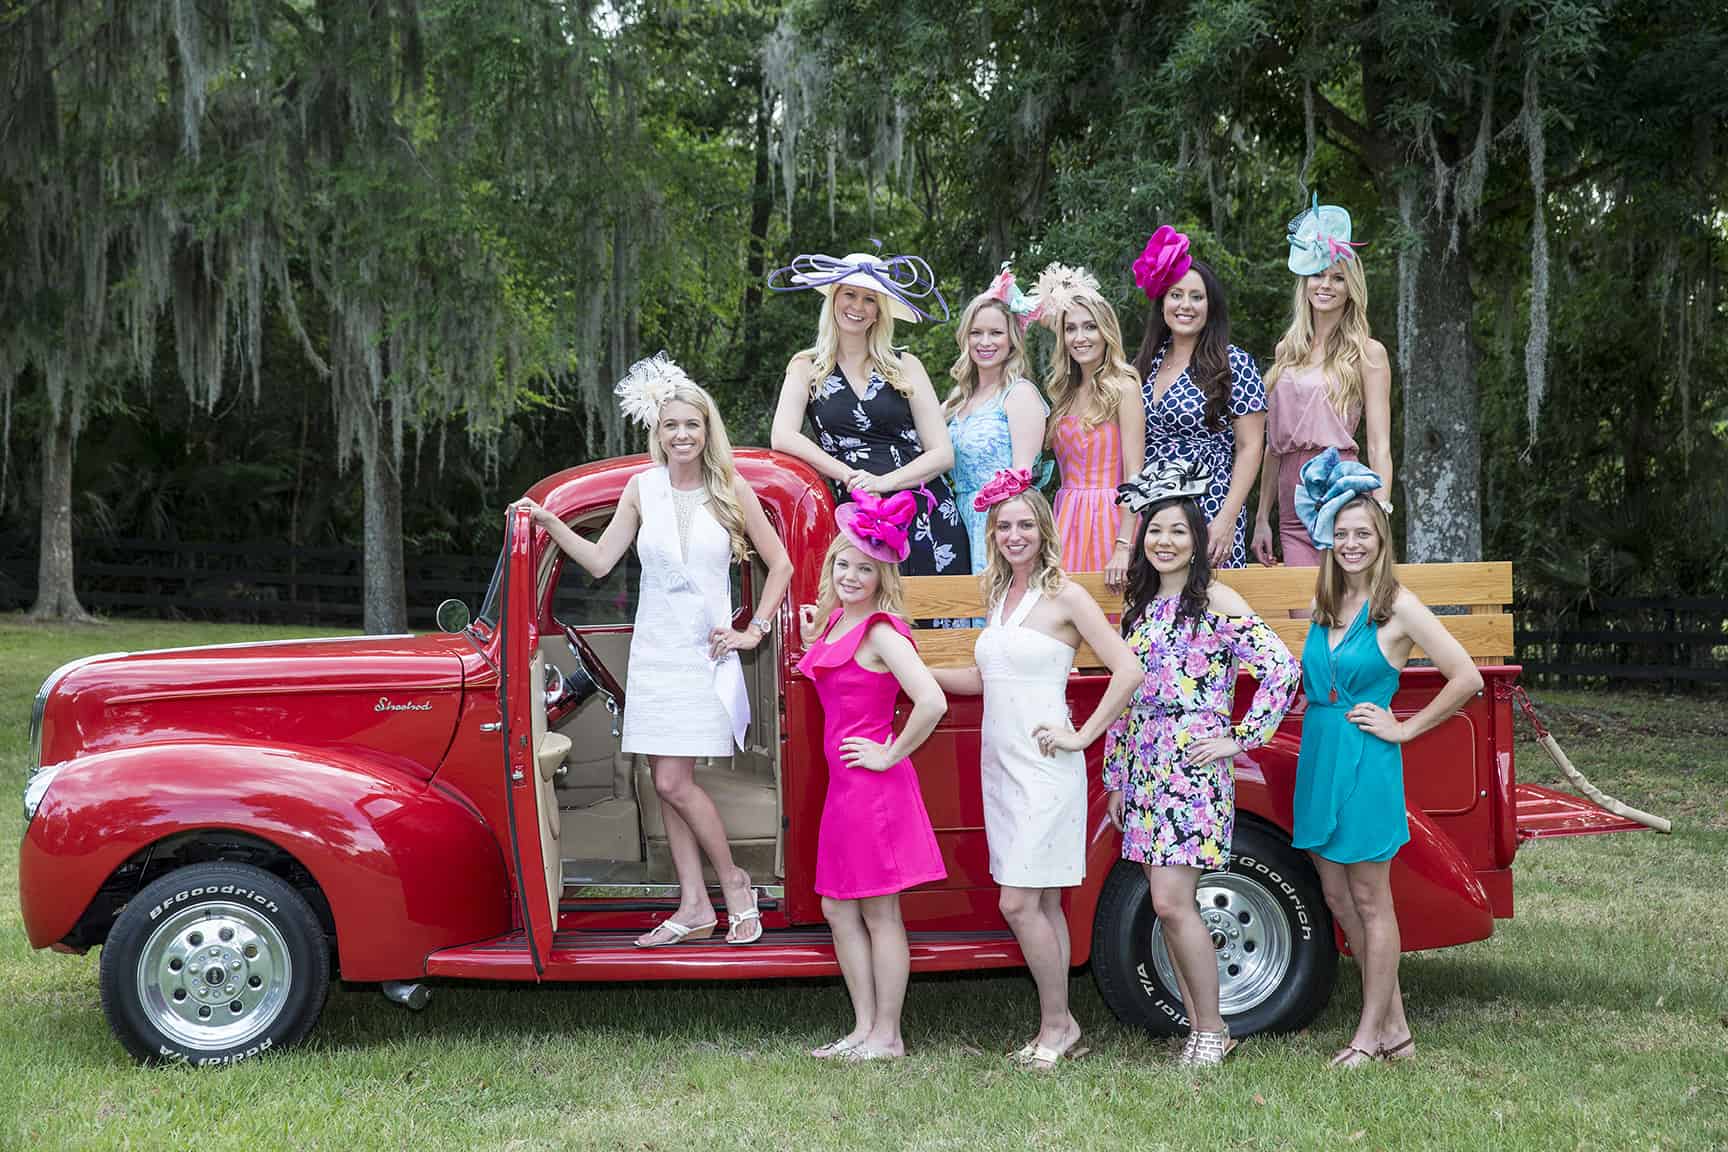 How To Host An Equestrian Style Inspired Bachelorette Party.